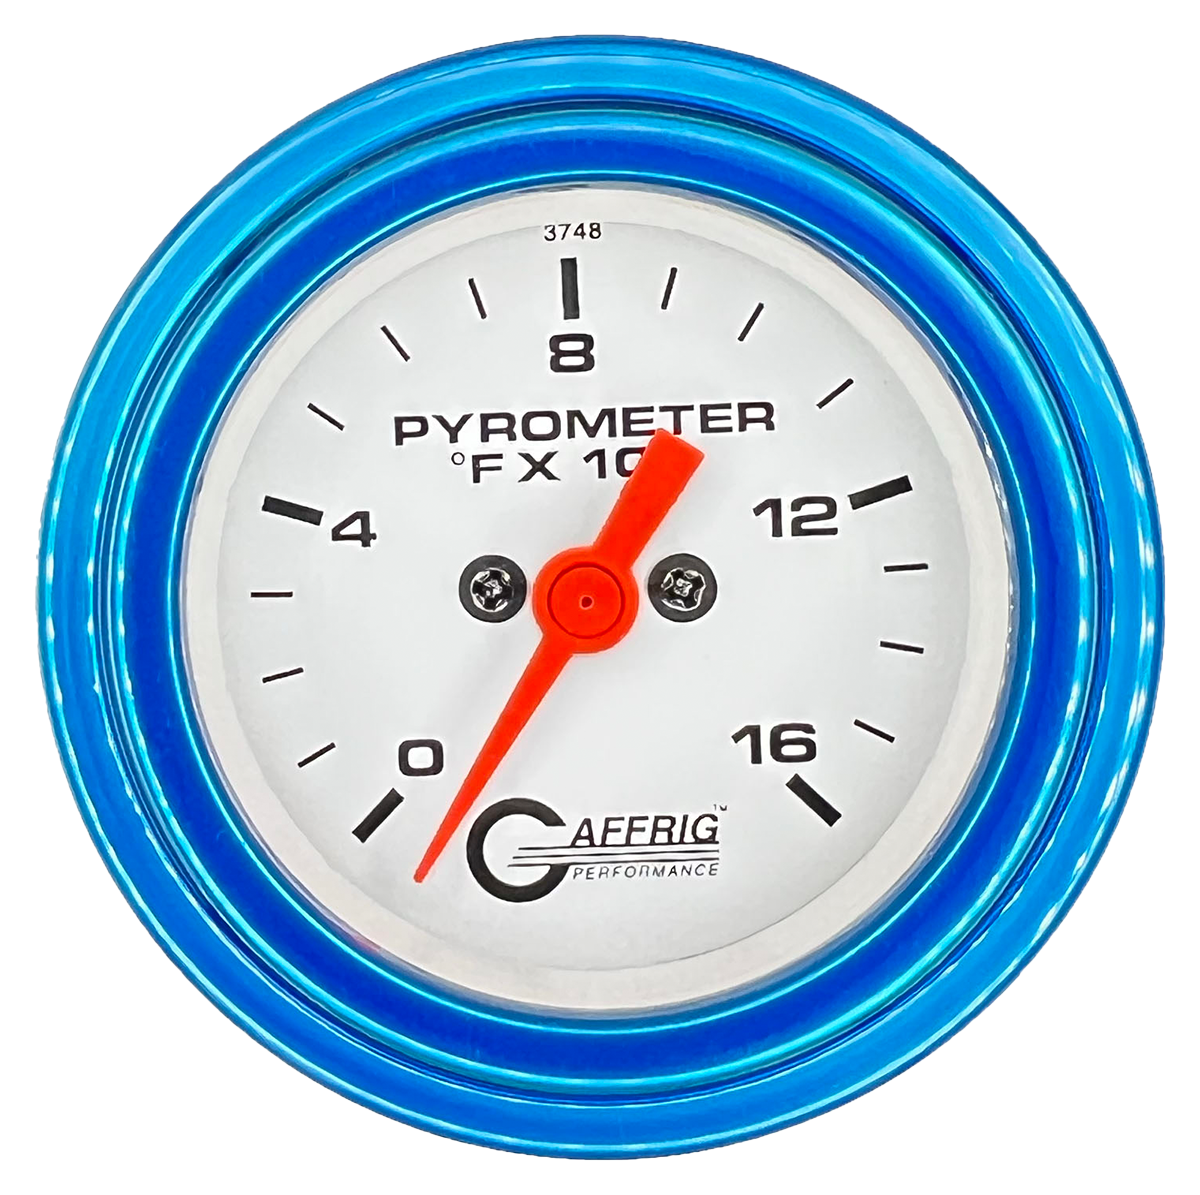 #5524 2 INCH ELECTRIC PYROMETER 0-1600 F White Blue / Step